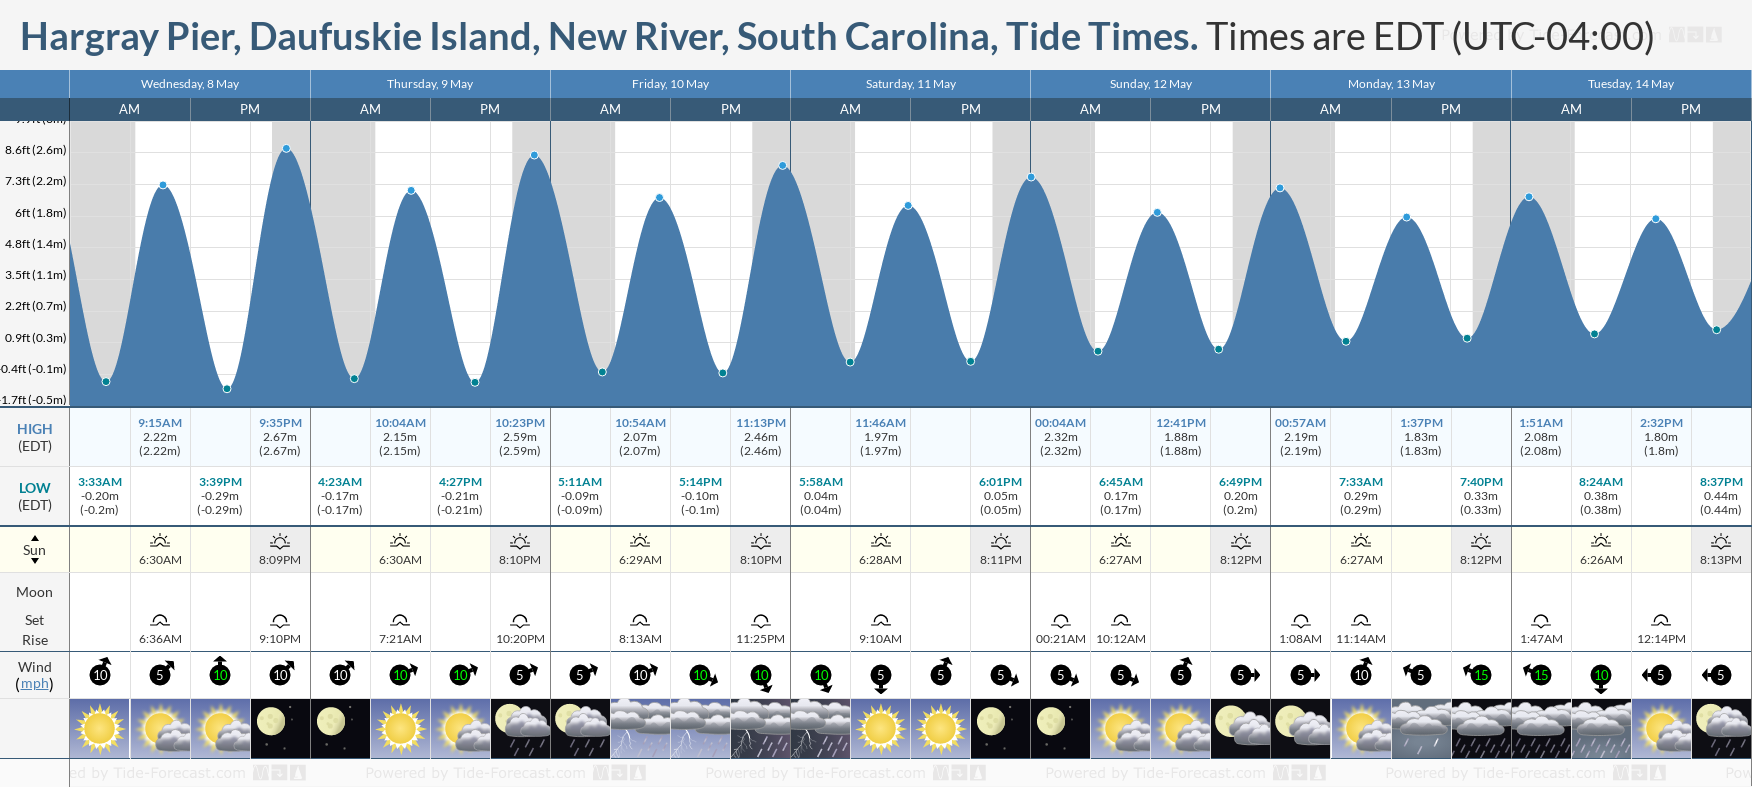 Hargray Pier, Daufuskie Island, New River, South Carolina Tide Chart including high and low tide tide times for the next 7 days